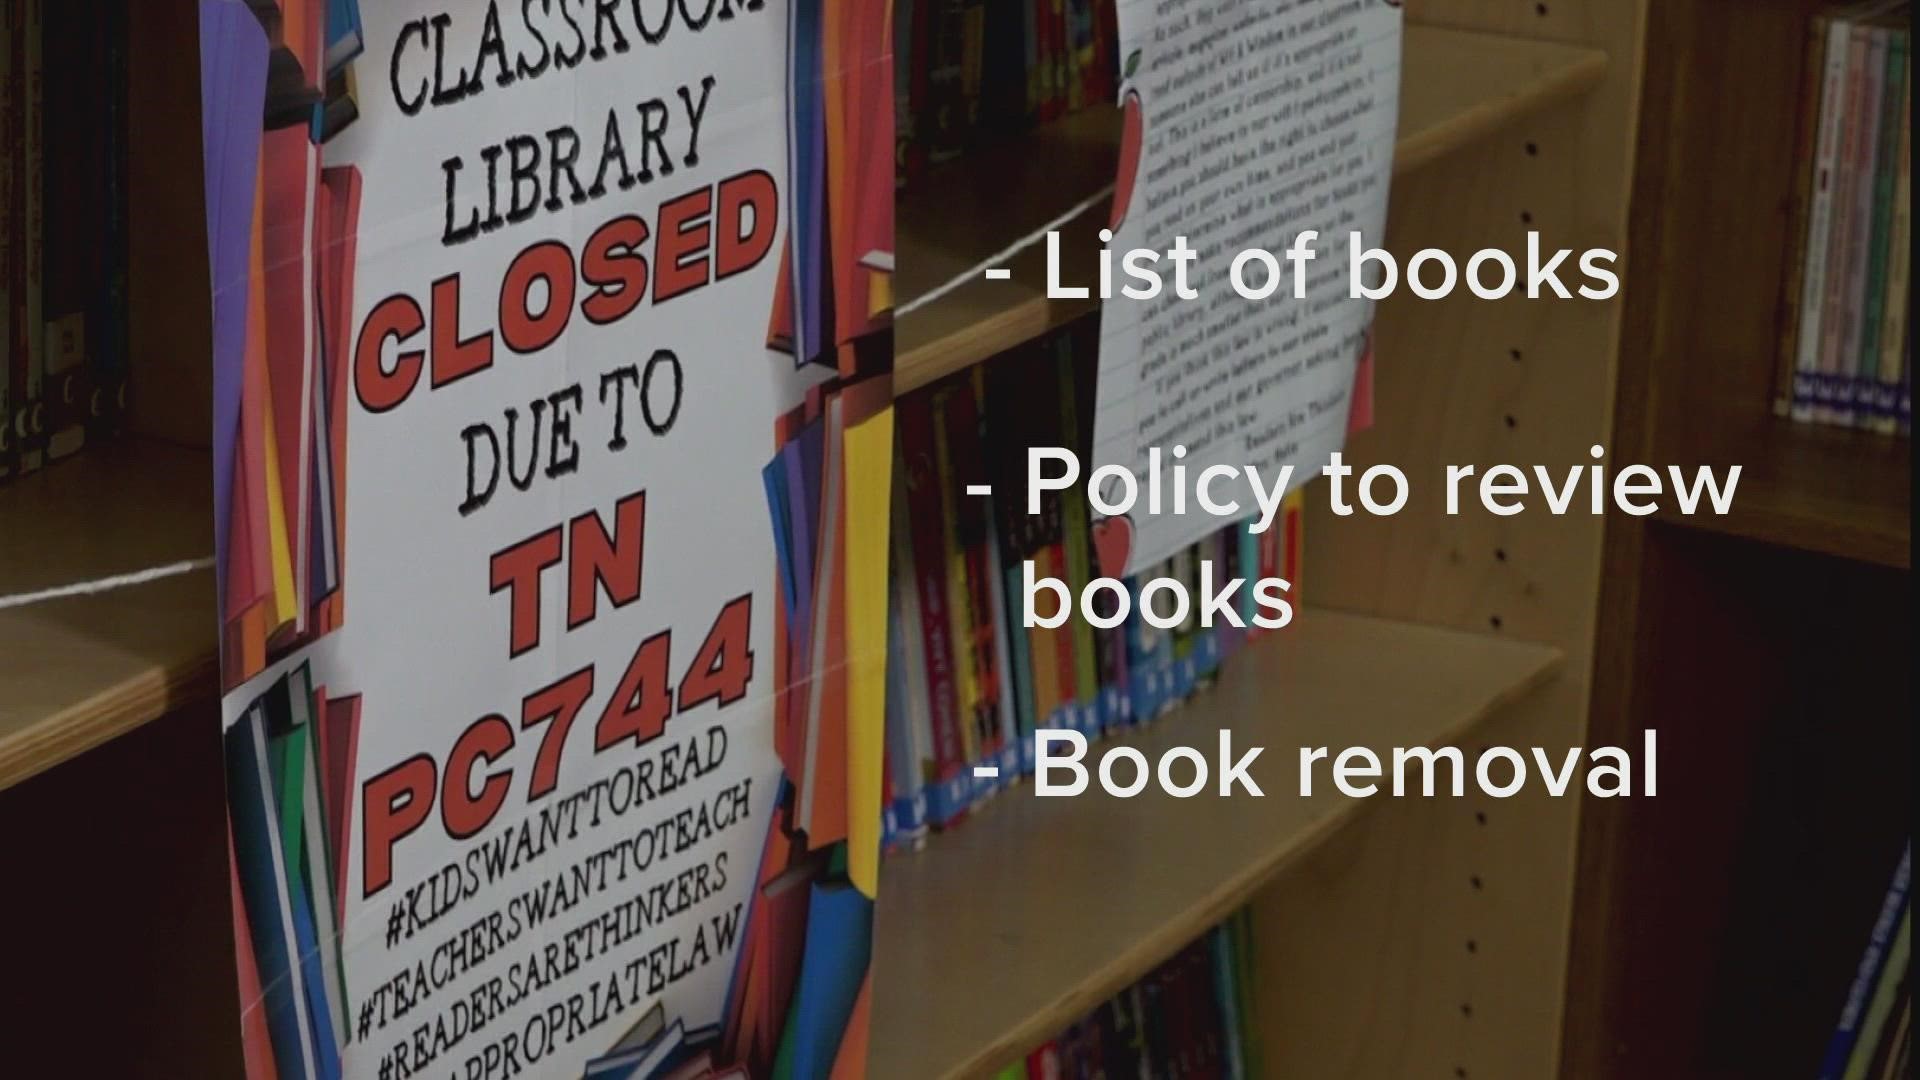 "I don't have time to inventory all these books and post that list online. So my only other option is to close my library to my kids," a teacher said.